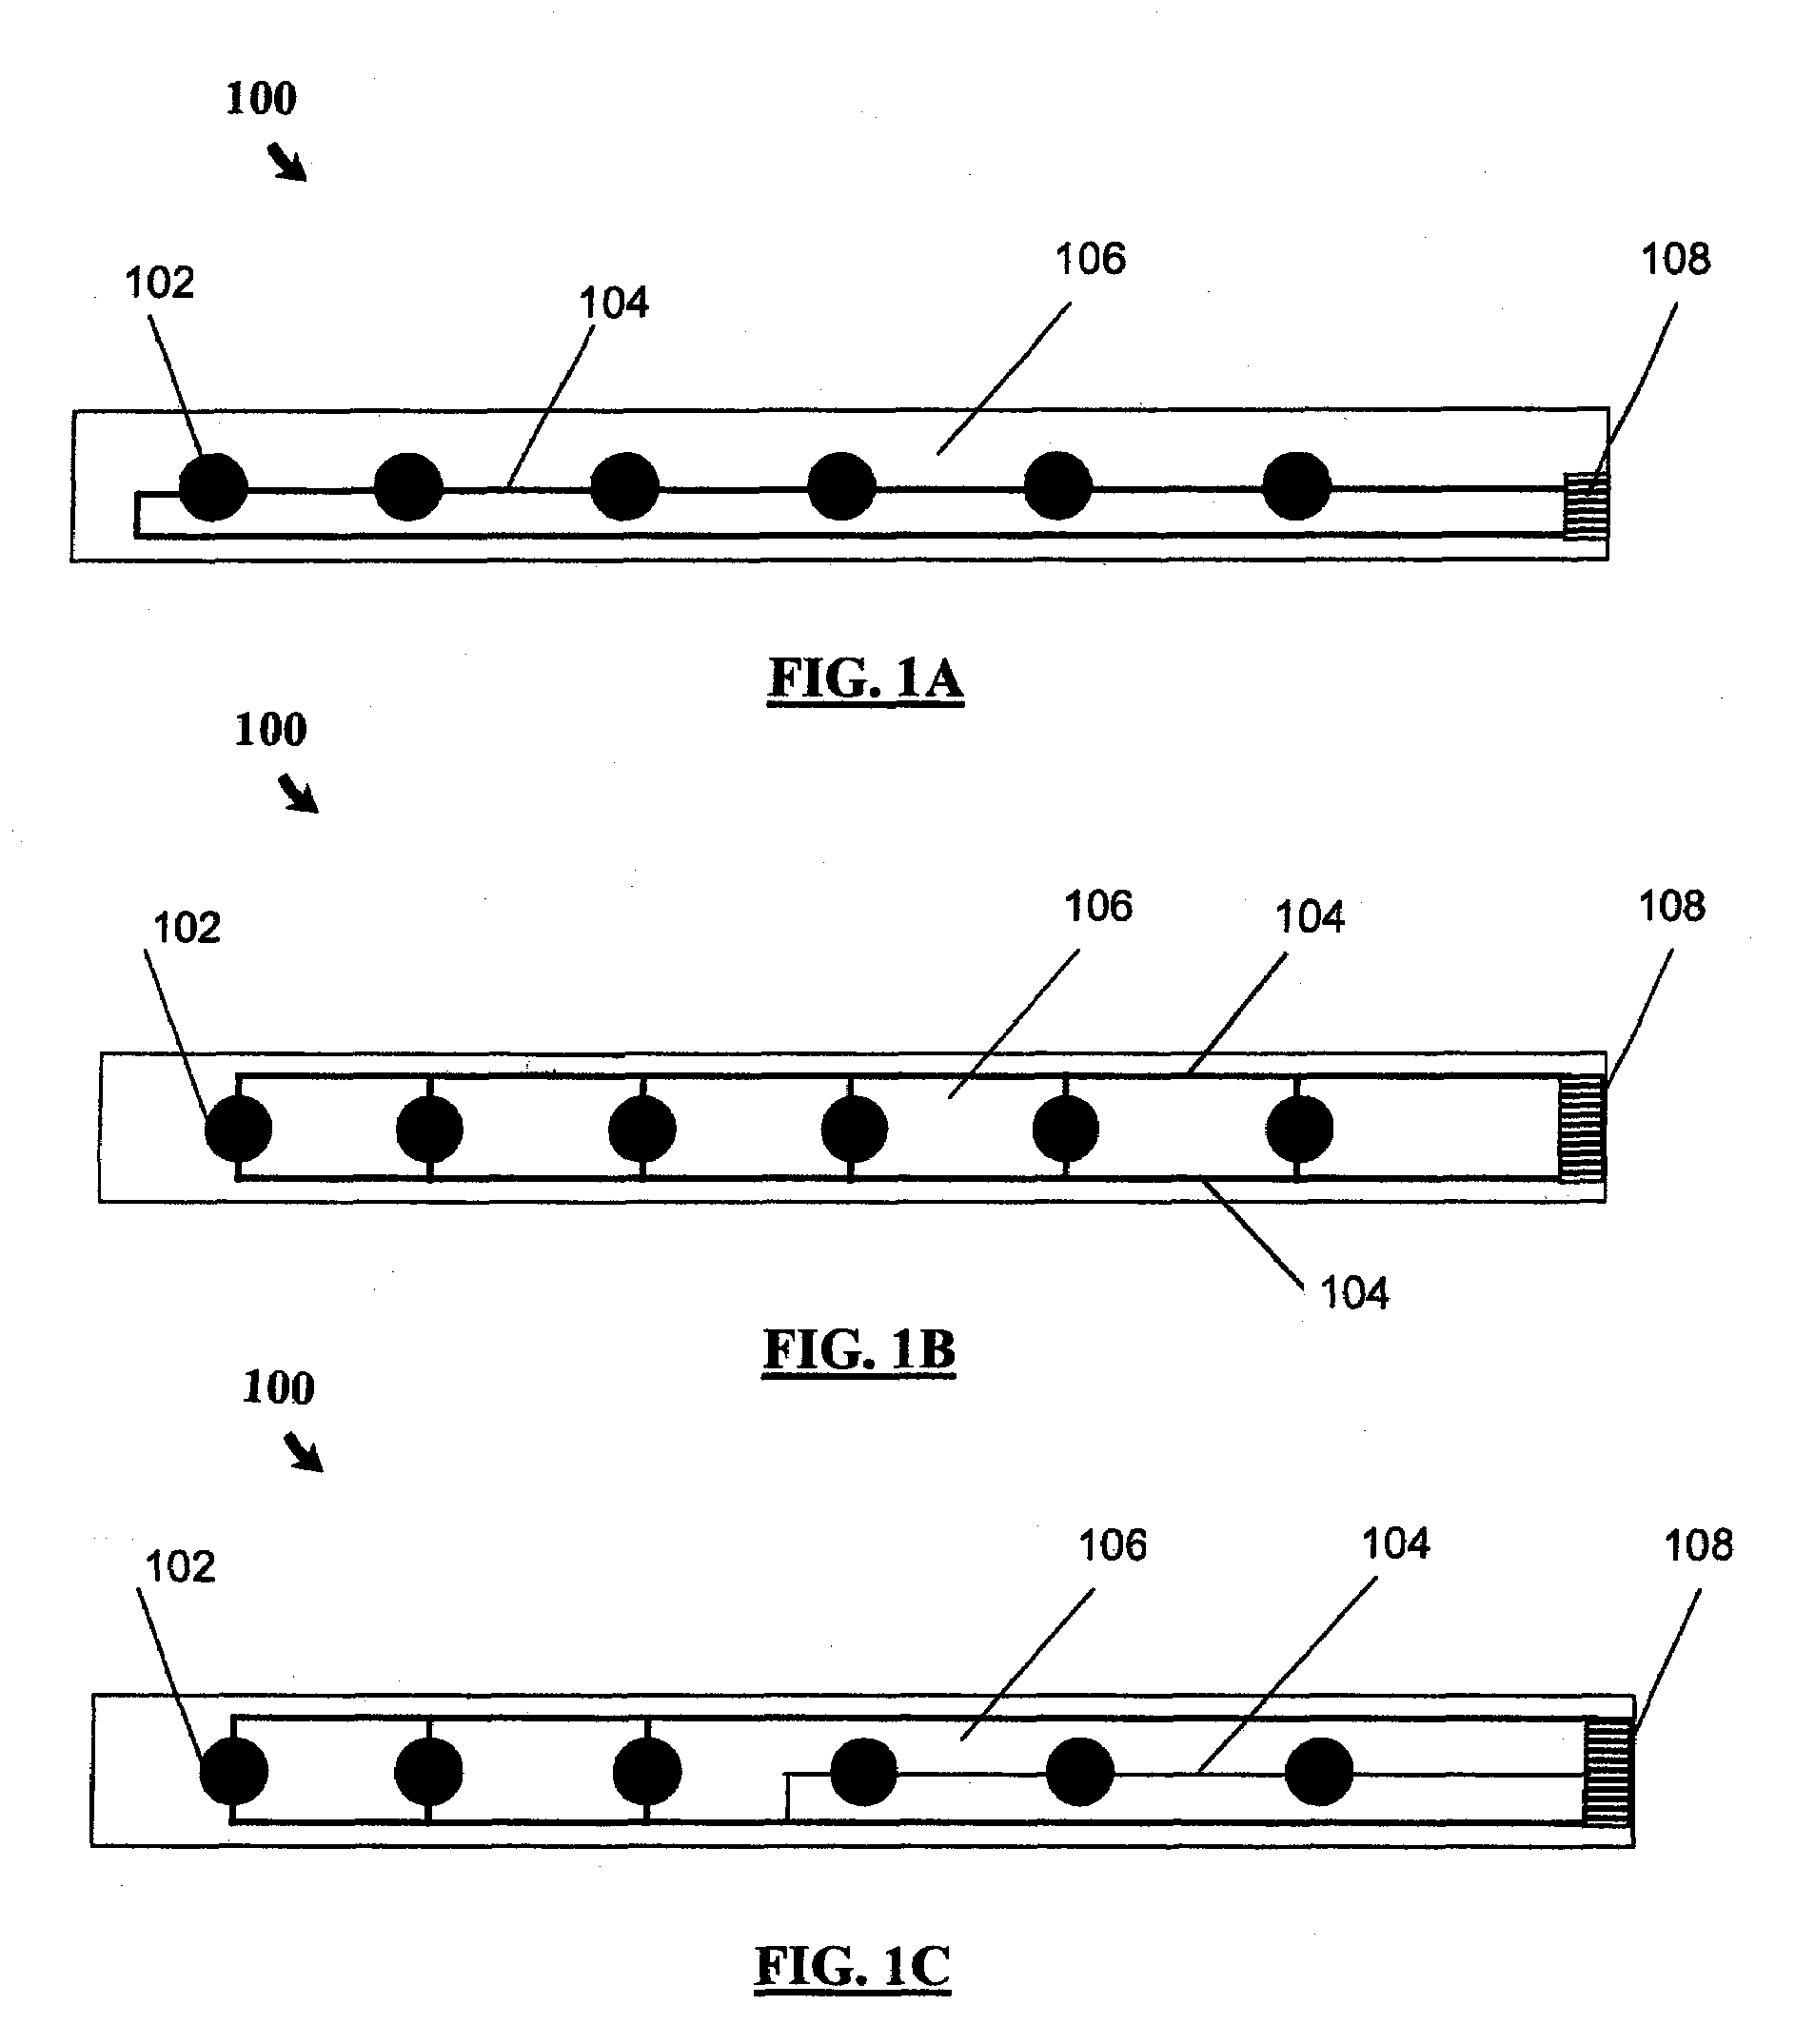 Single-wire sensor/actuator network for structure health monitoring